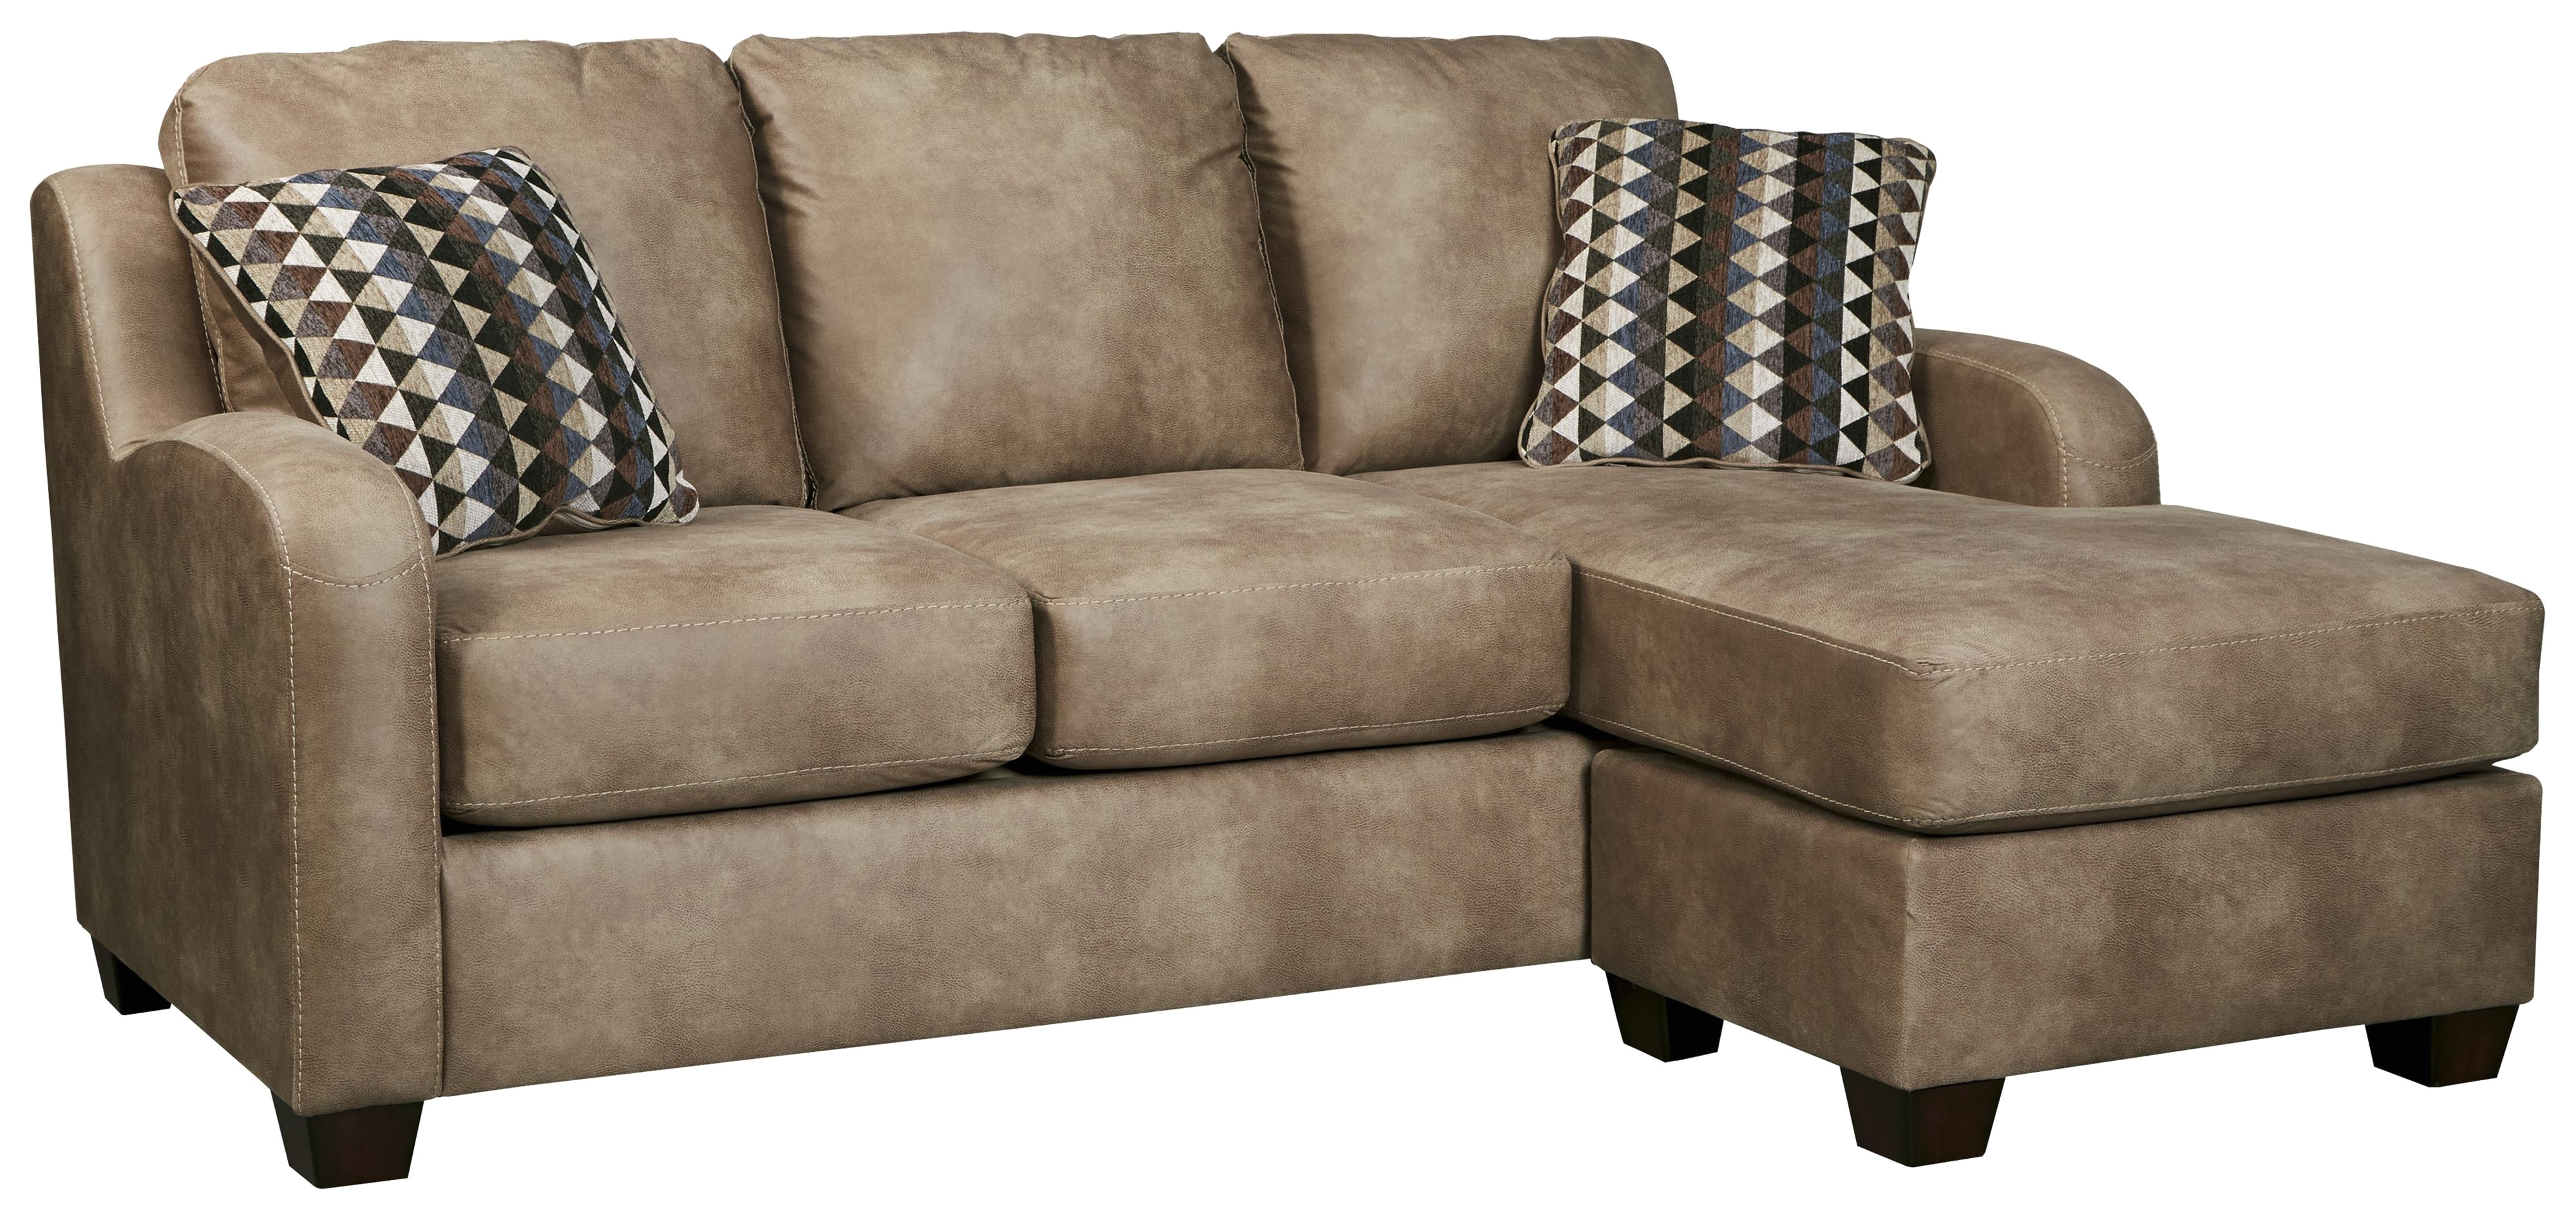 full size of sofaleather chaise sofa 6 piece sectional sofa grey chesterfield sofa jonathan